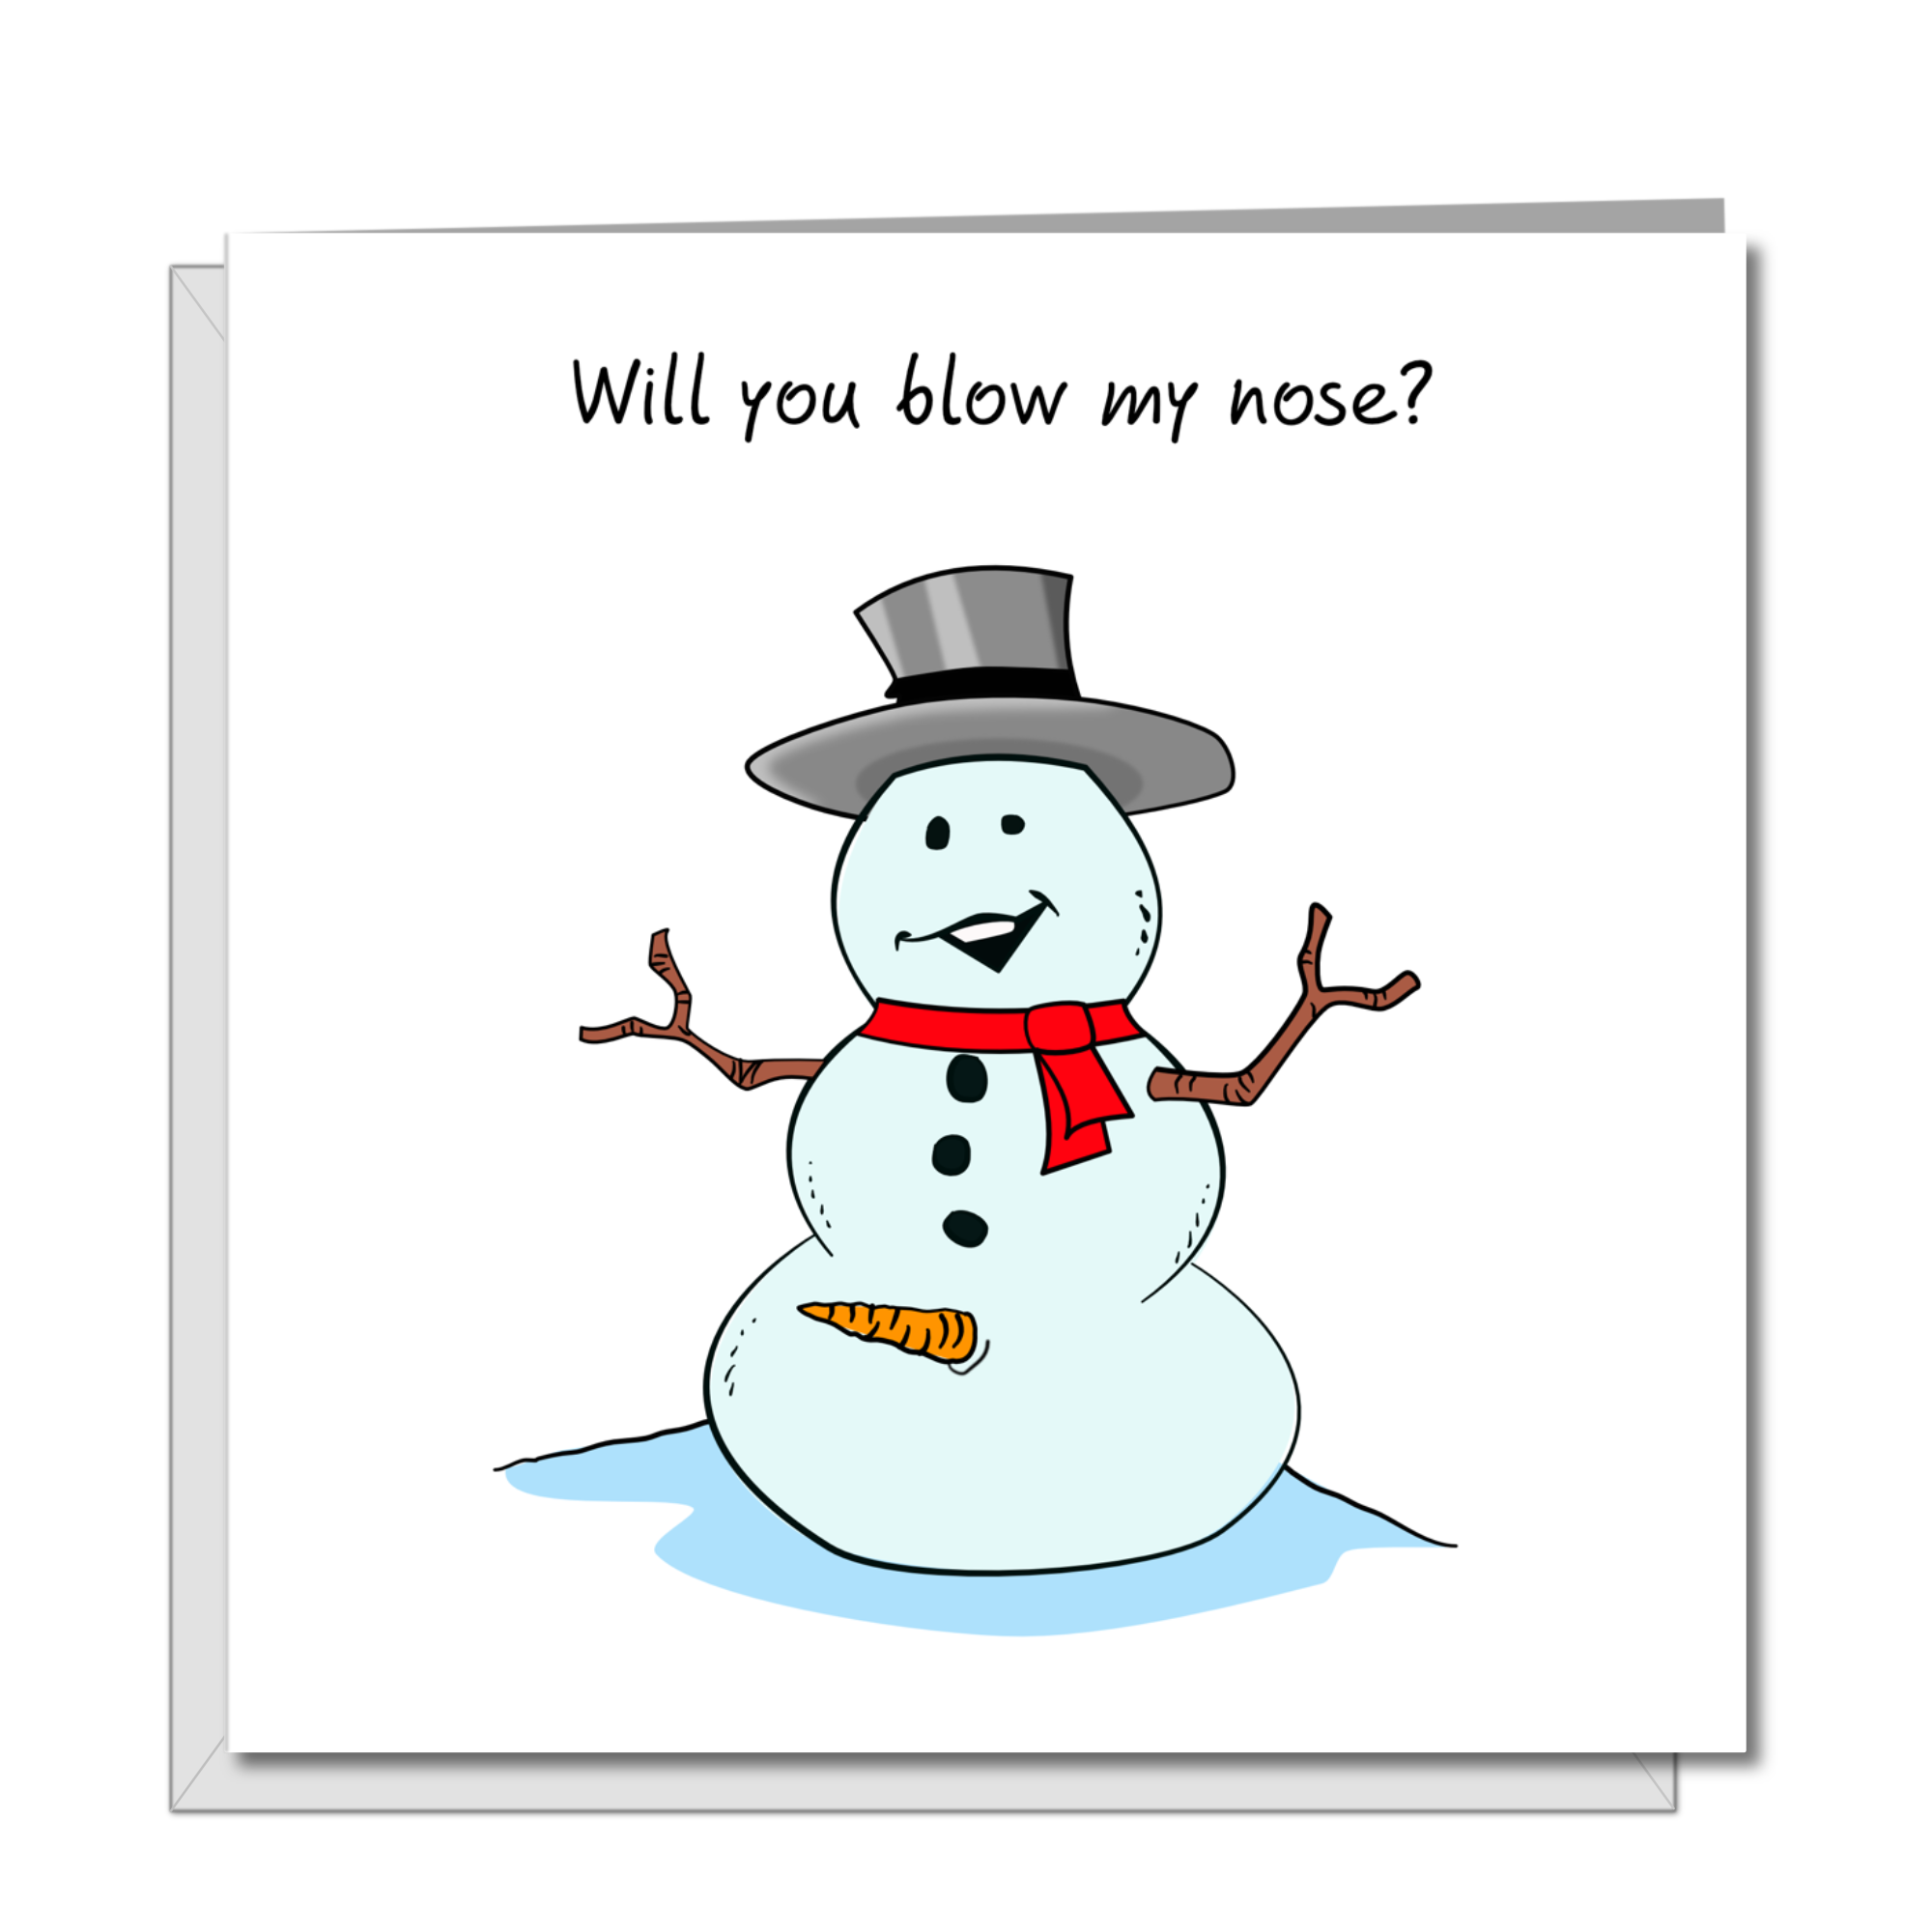 Naughty Christmas Card for girlfriend or wife - sexy, adult and rude Snowman - humorous amusing